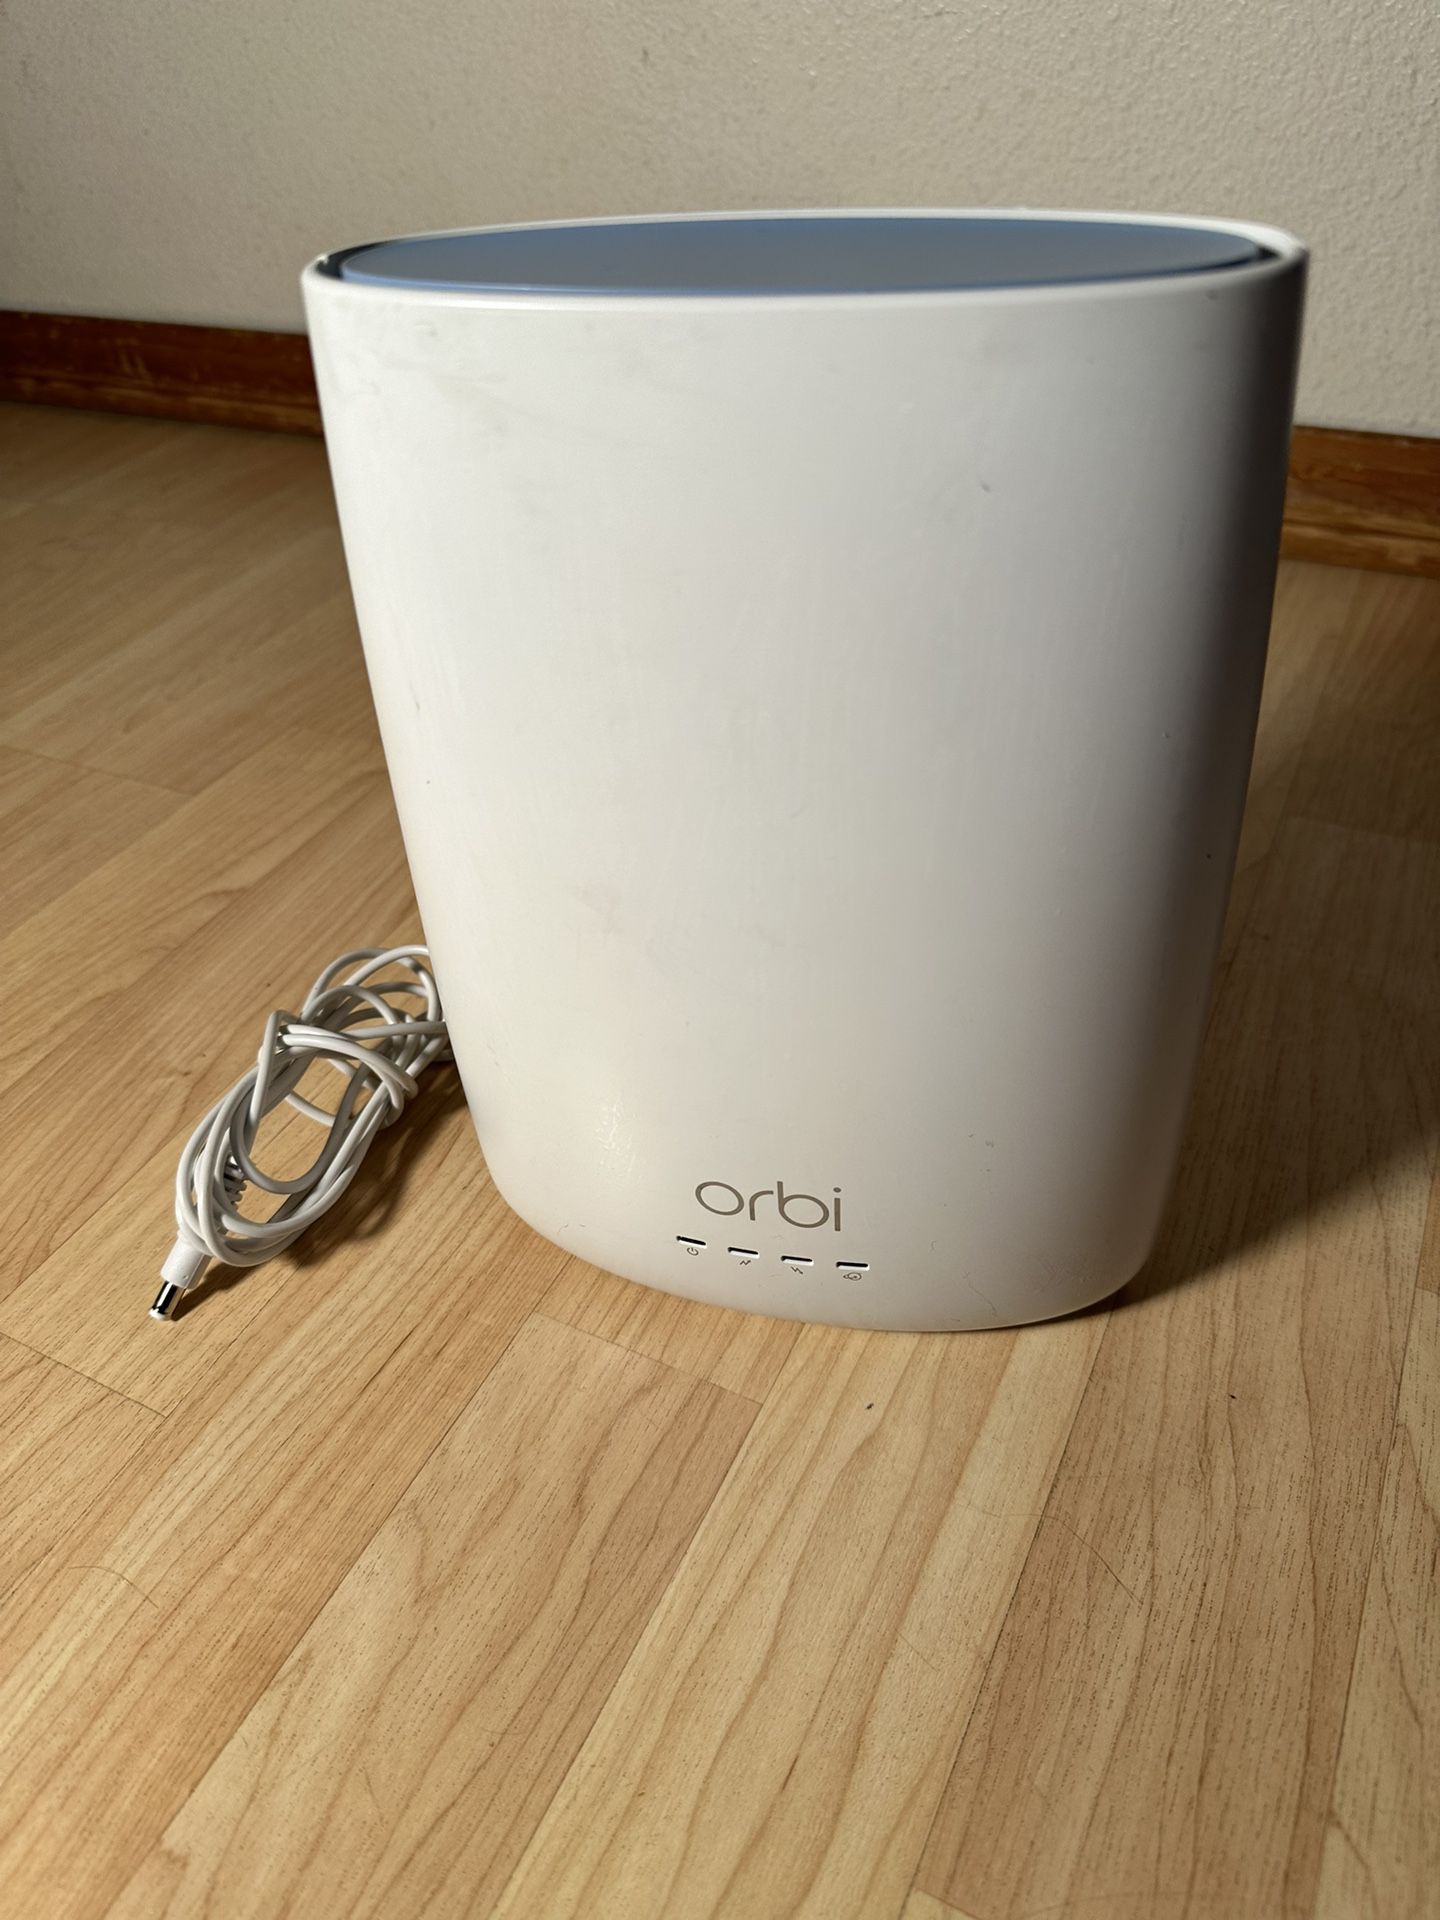 NETGEAR Orbi AC2200 (CBR40) Tri-Band WiFi Cable Modem Router, 2.2 Gbps